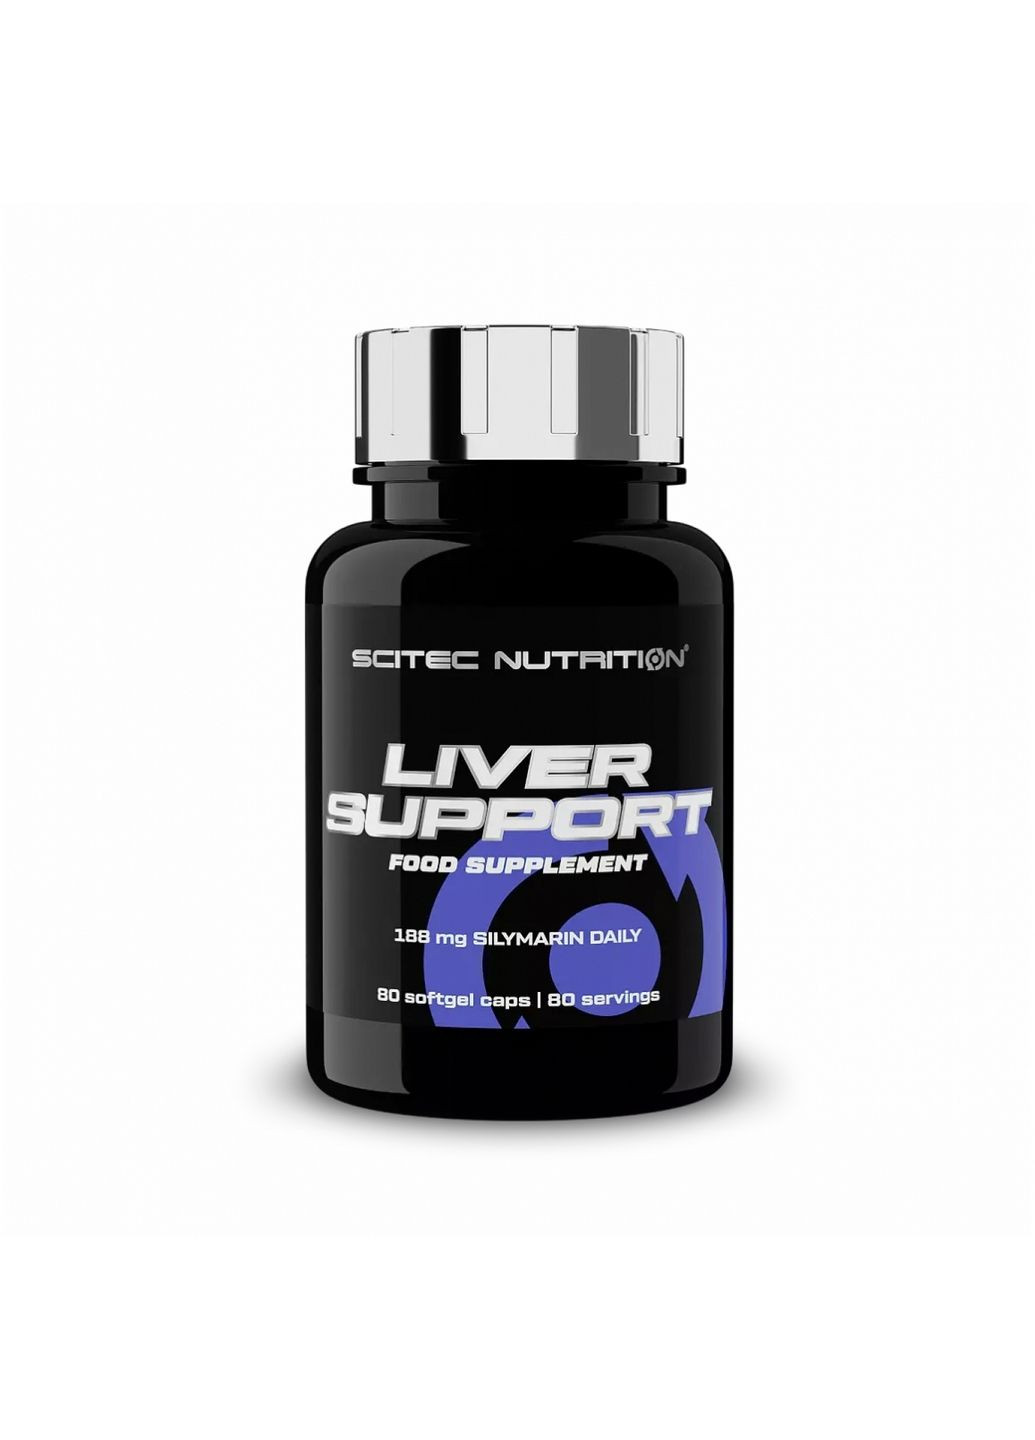 Натуральна добавка Liver Support, 80 капсул Scitec Nutrition (294925373)